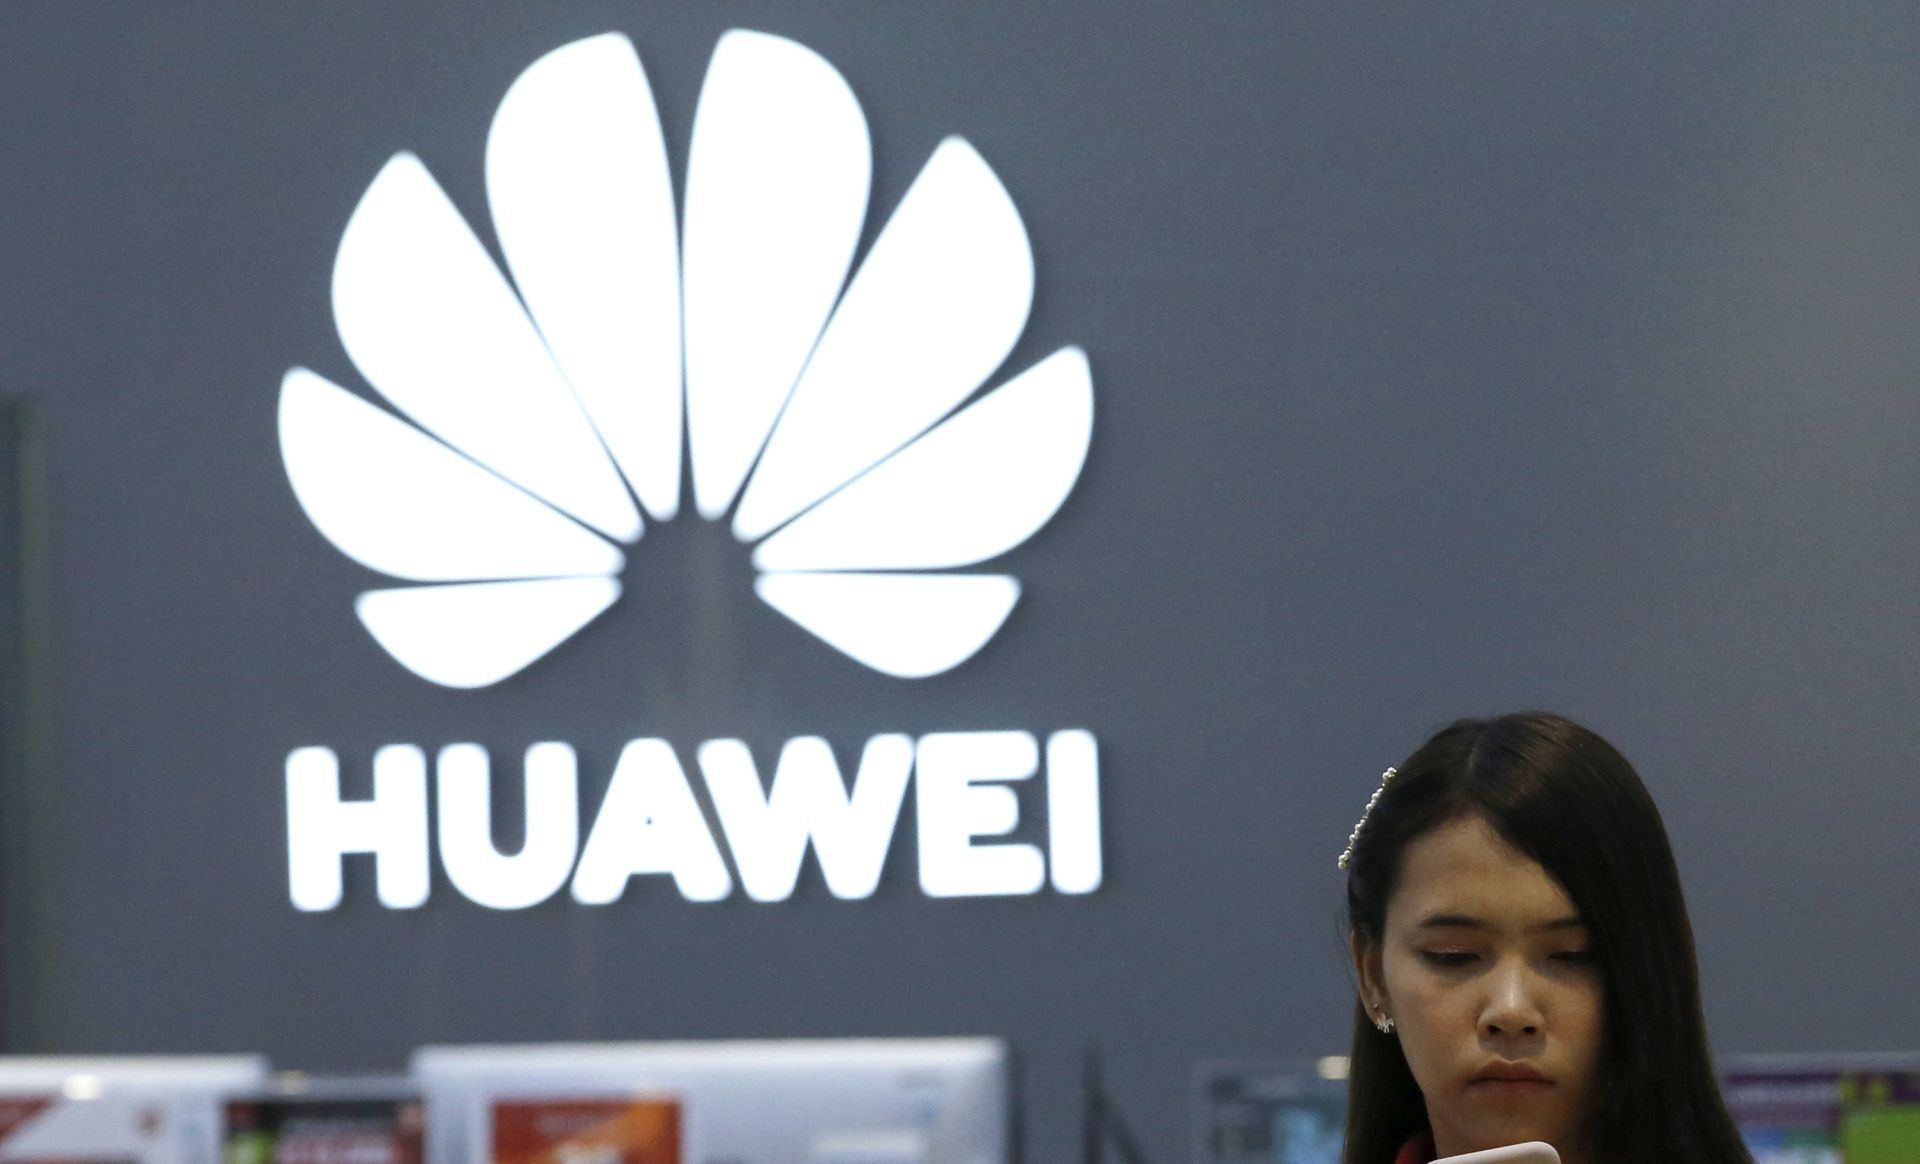 epa07588398 A Thai employee checks a Huawei smartphone at a Huawei store in Bangkok, Thailand, 21 May 2019. The US based multinational technology company Google halted business with Huawei after the US President signed an executive order declaring the Chinese giant telecommunication company, Huawei on a trade blacklist over national security concerns and issuing restrictions that will hamper the Chinese giant smartphone's efforts to do business with US companies causing Huawei will lose access to updates for the Android operating system.  EPA/RUNGROJ YONGRIT